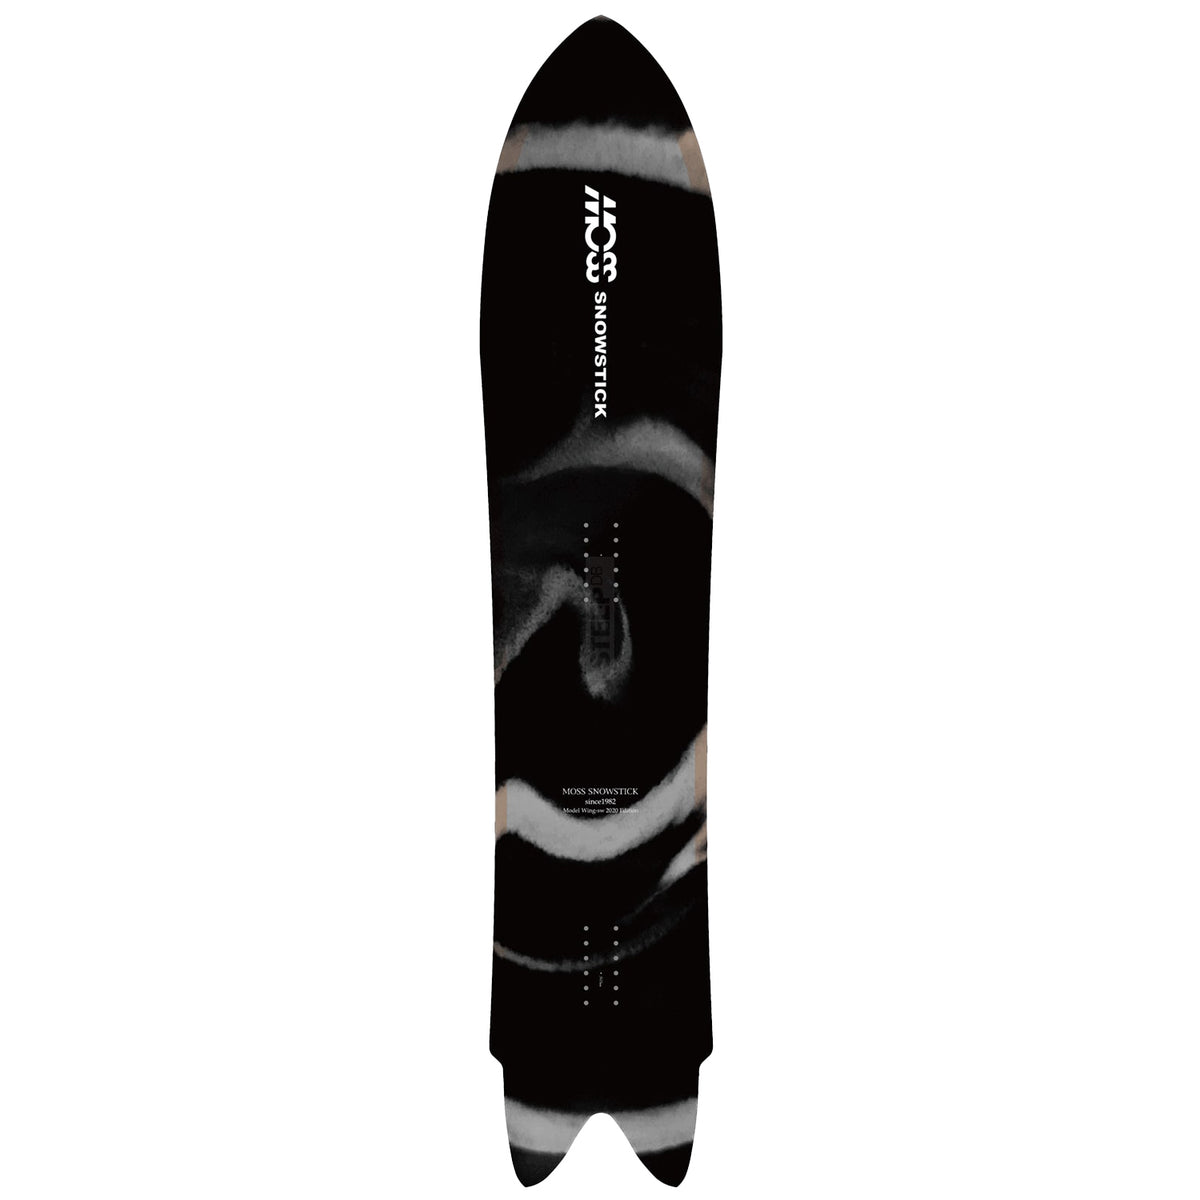 Moss Snowstick Wing Swallow 57 Snowboard 2021 – Pacific Boarder